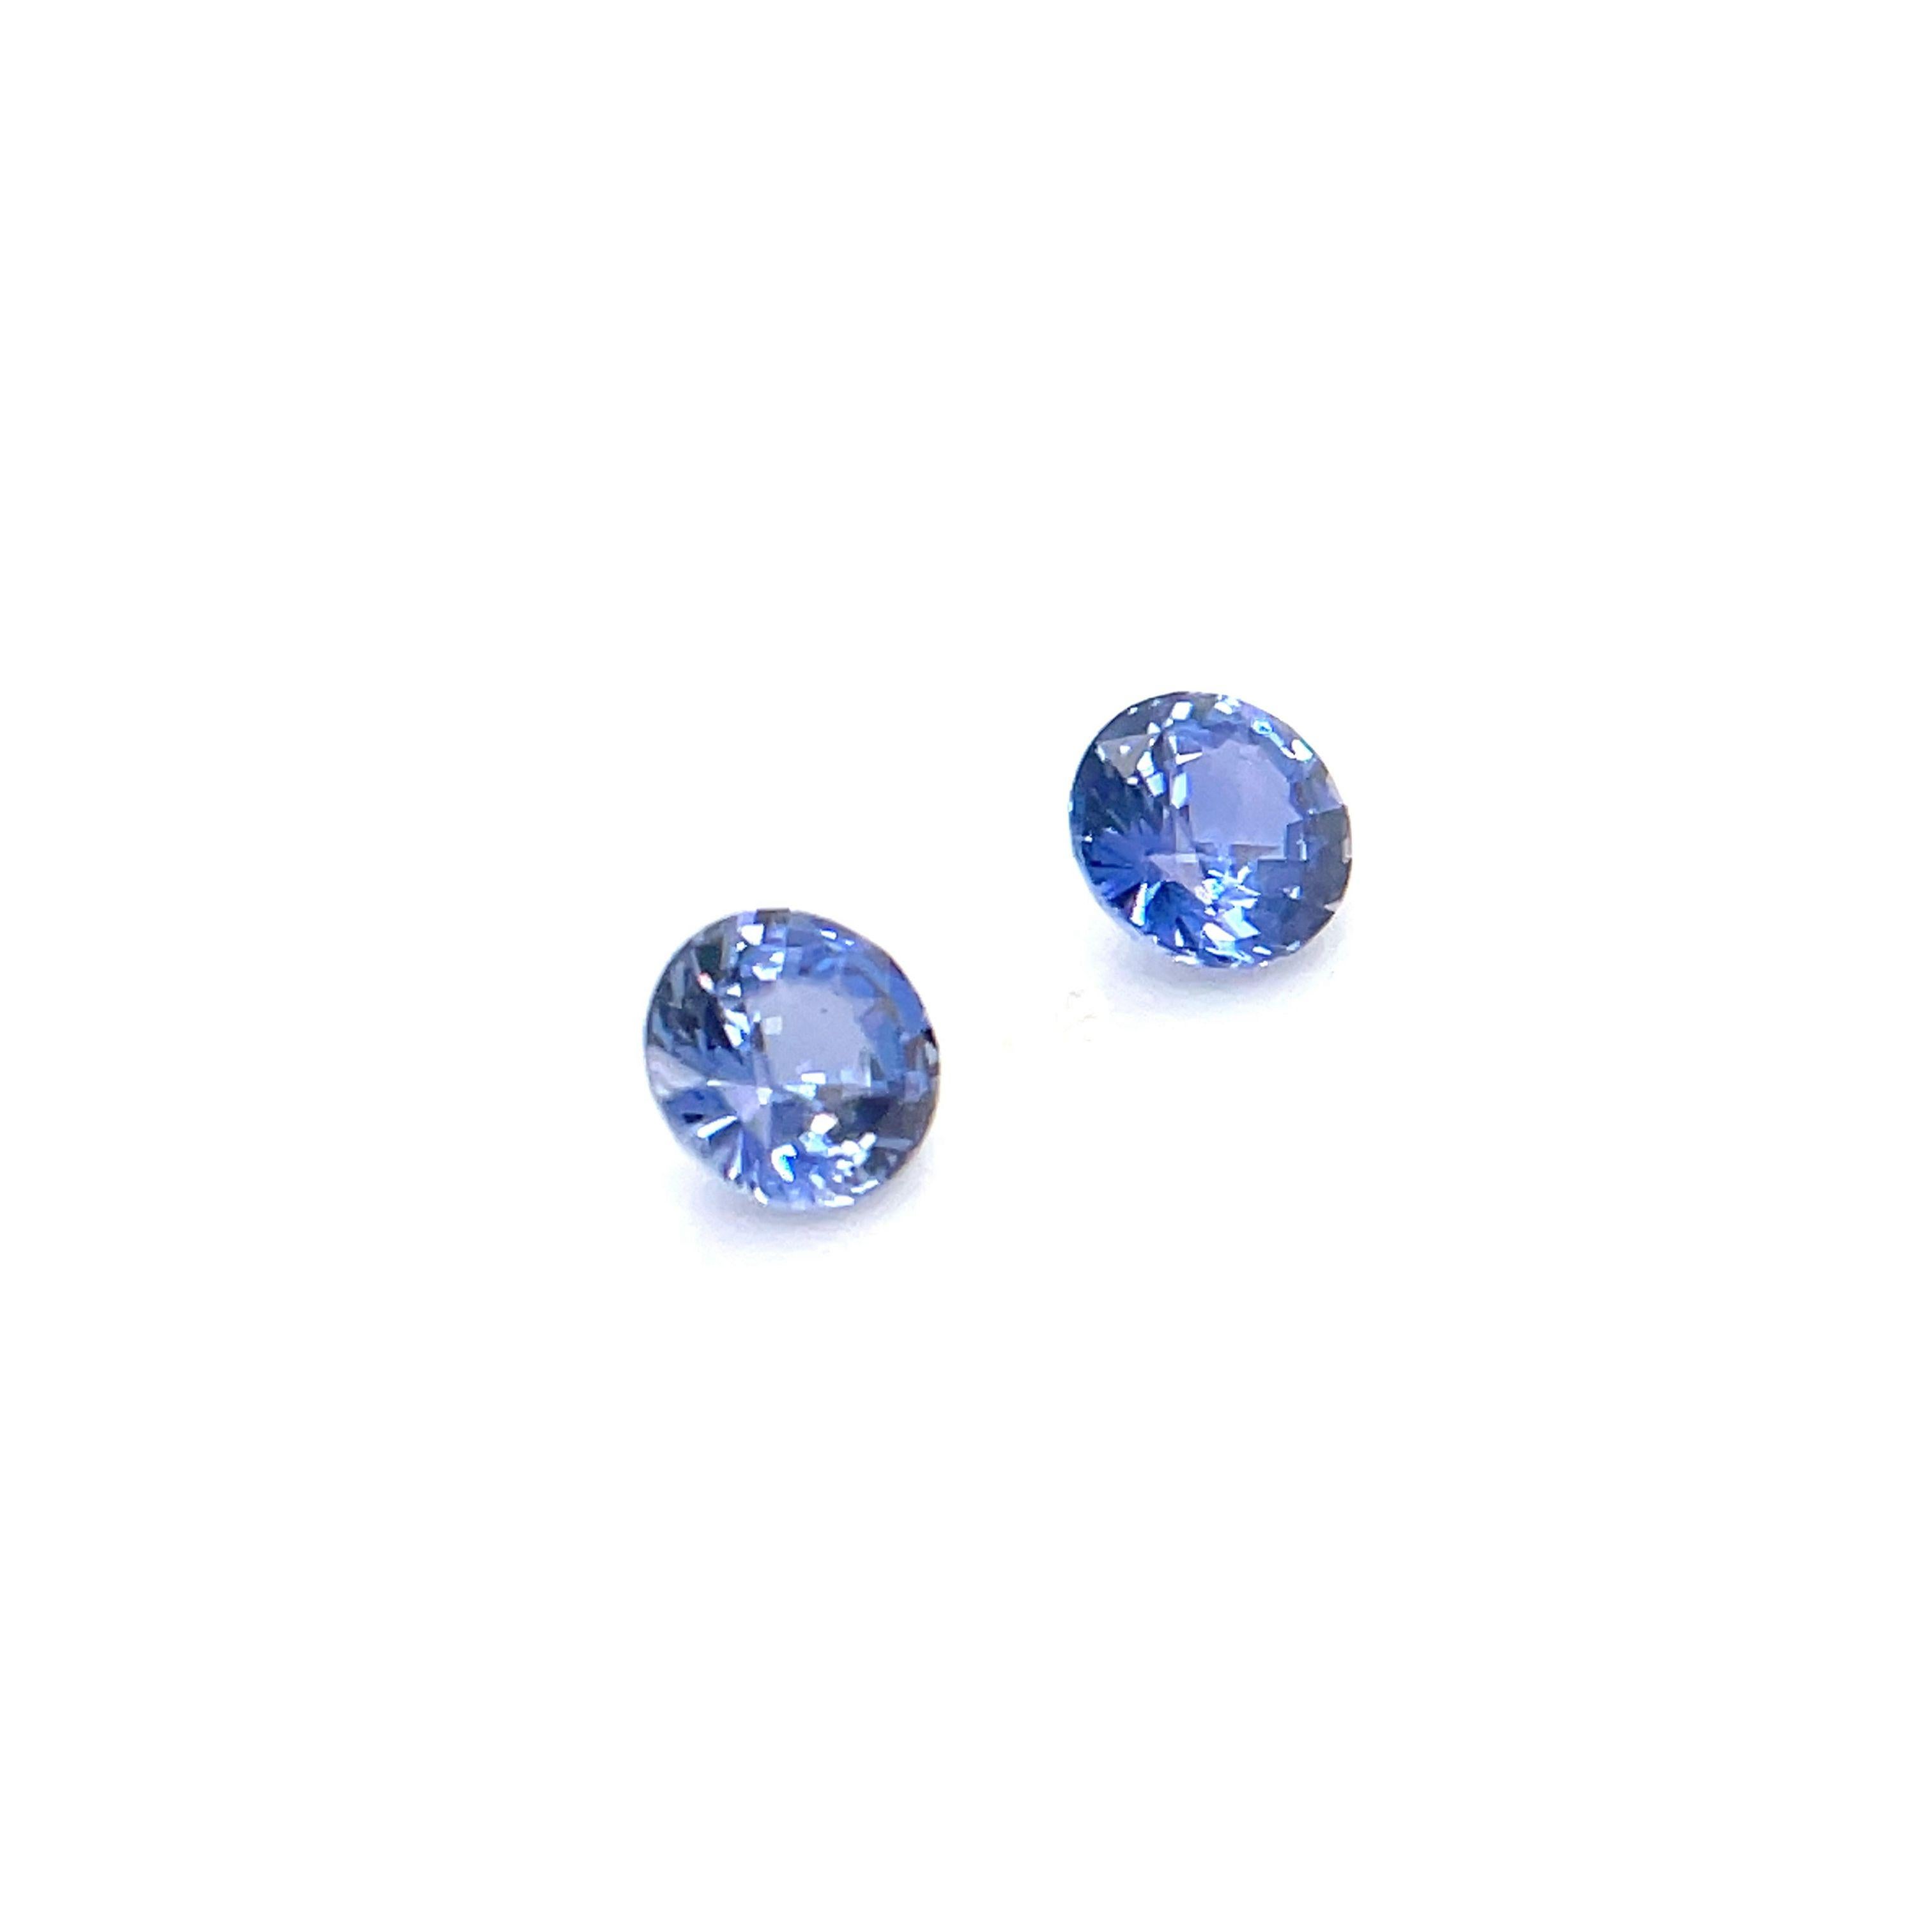 These gems have a total weight of 1.21 carats and a stunning brilliance that captivates the senses.

One boasts 0.63 carats, measuring 4.98 x 5.01 x 3.31mm, while the other shines with 0.58 carats, measuring 4.98 x 4.98 x 3.15mm.

These exceptional